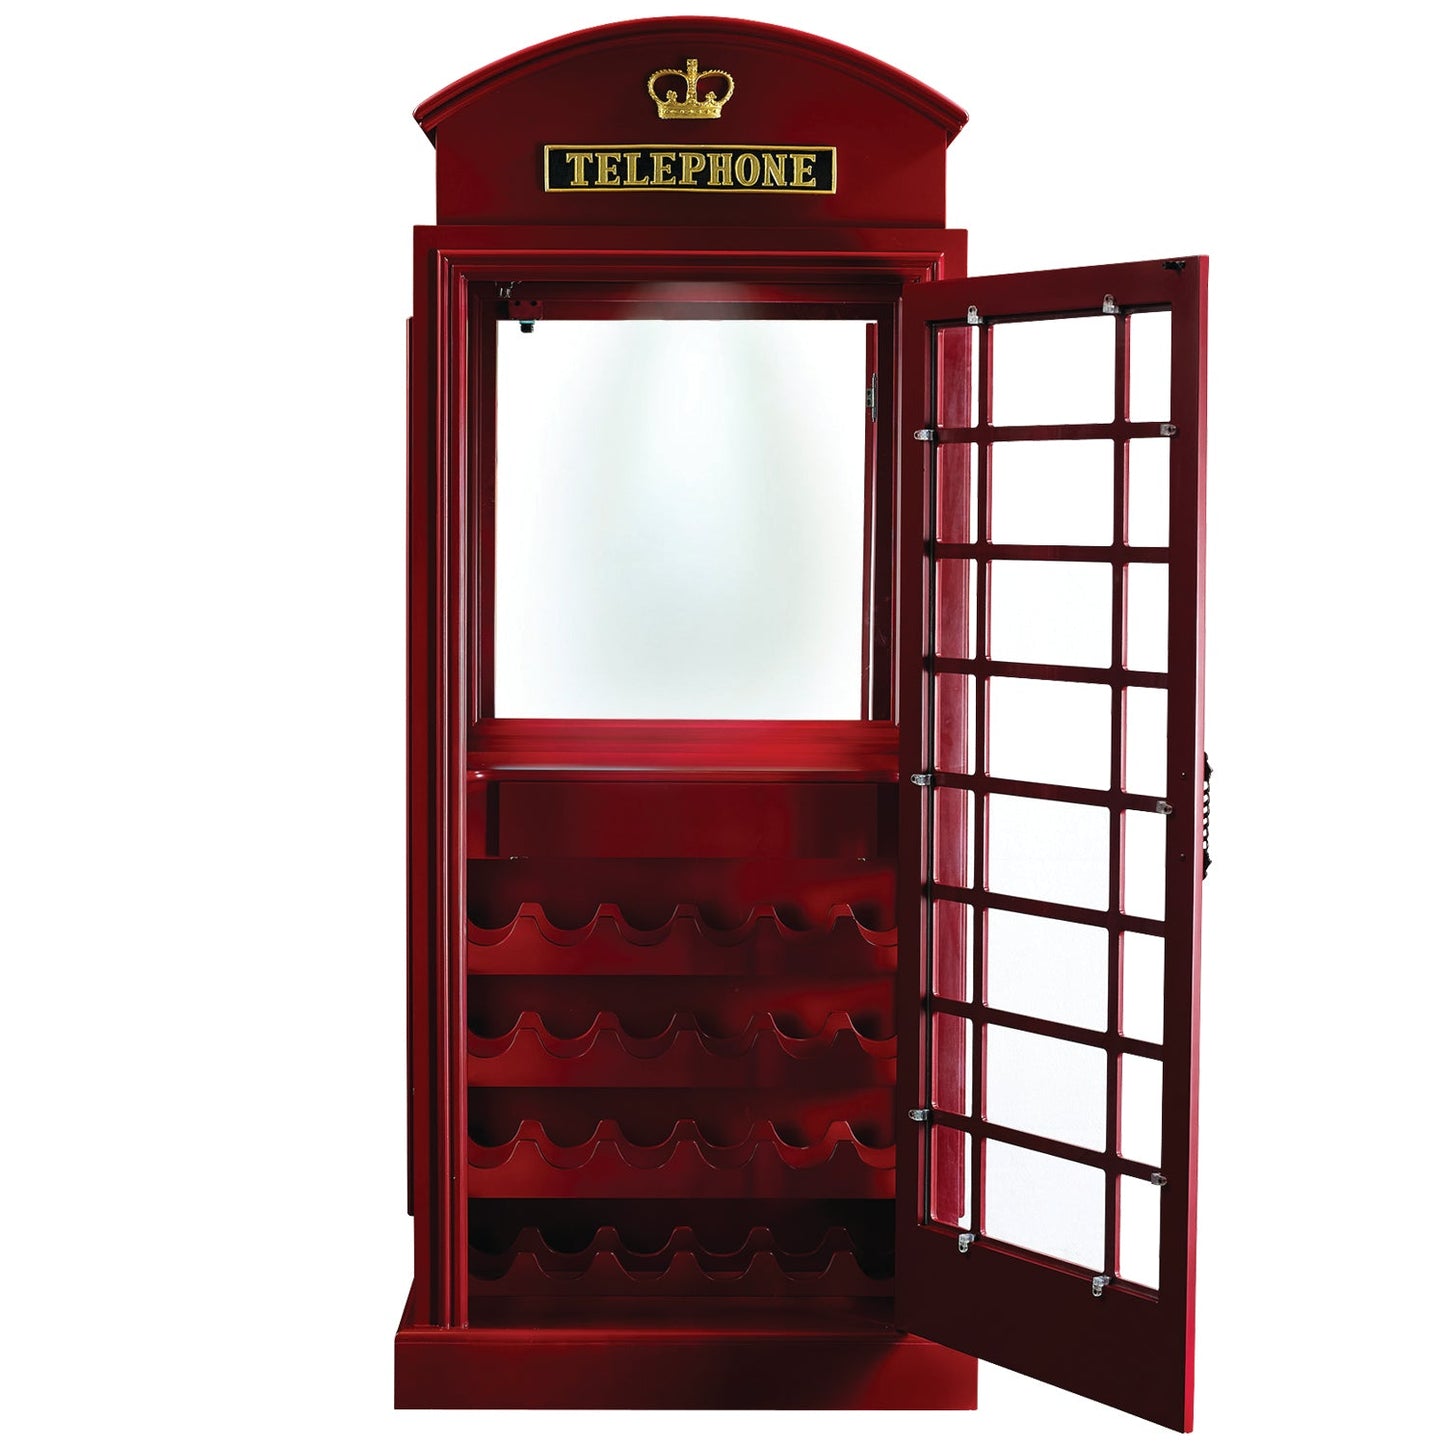 RAM Game Room Old English Telephone Booth Bar Cabinet - The Bar Design